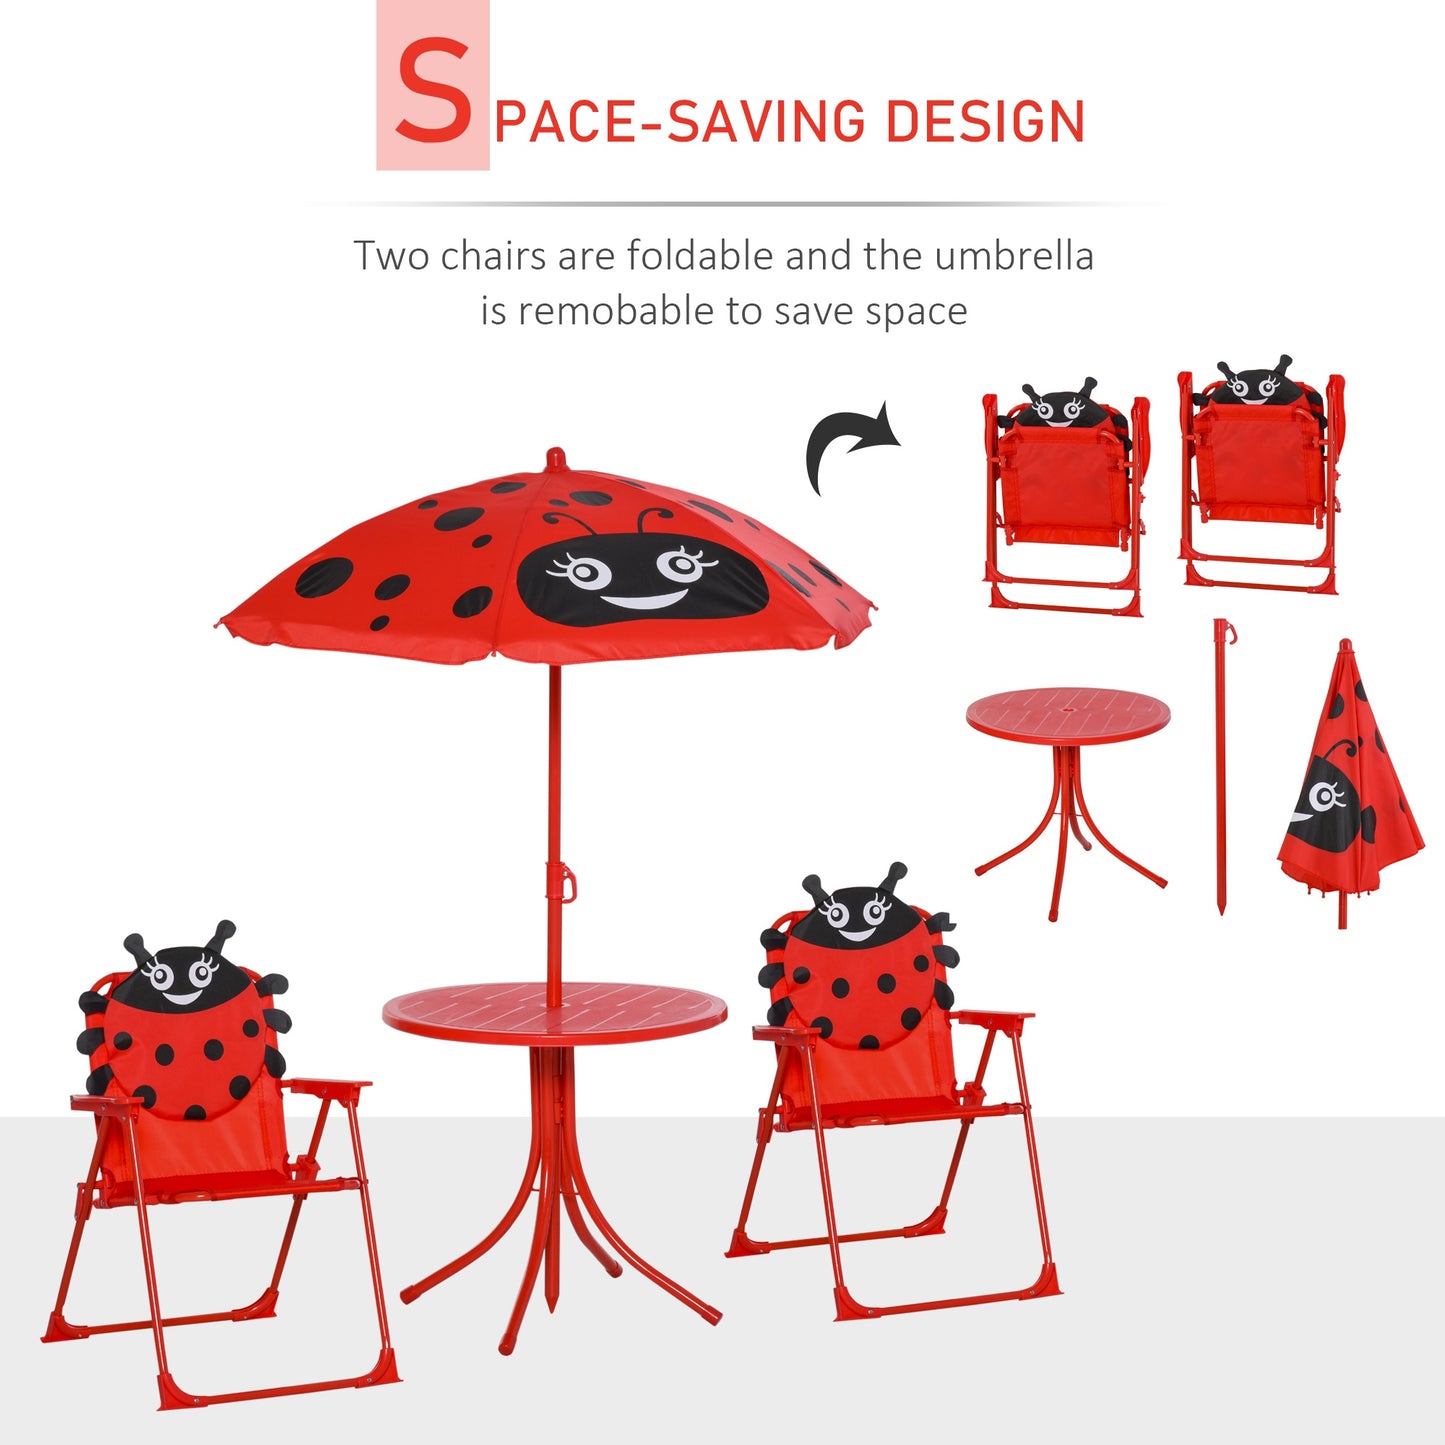 Outsunny Kids Folding Picnic Table and Chairs Set Ladybug Pattern Outdoor w/ Parasol